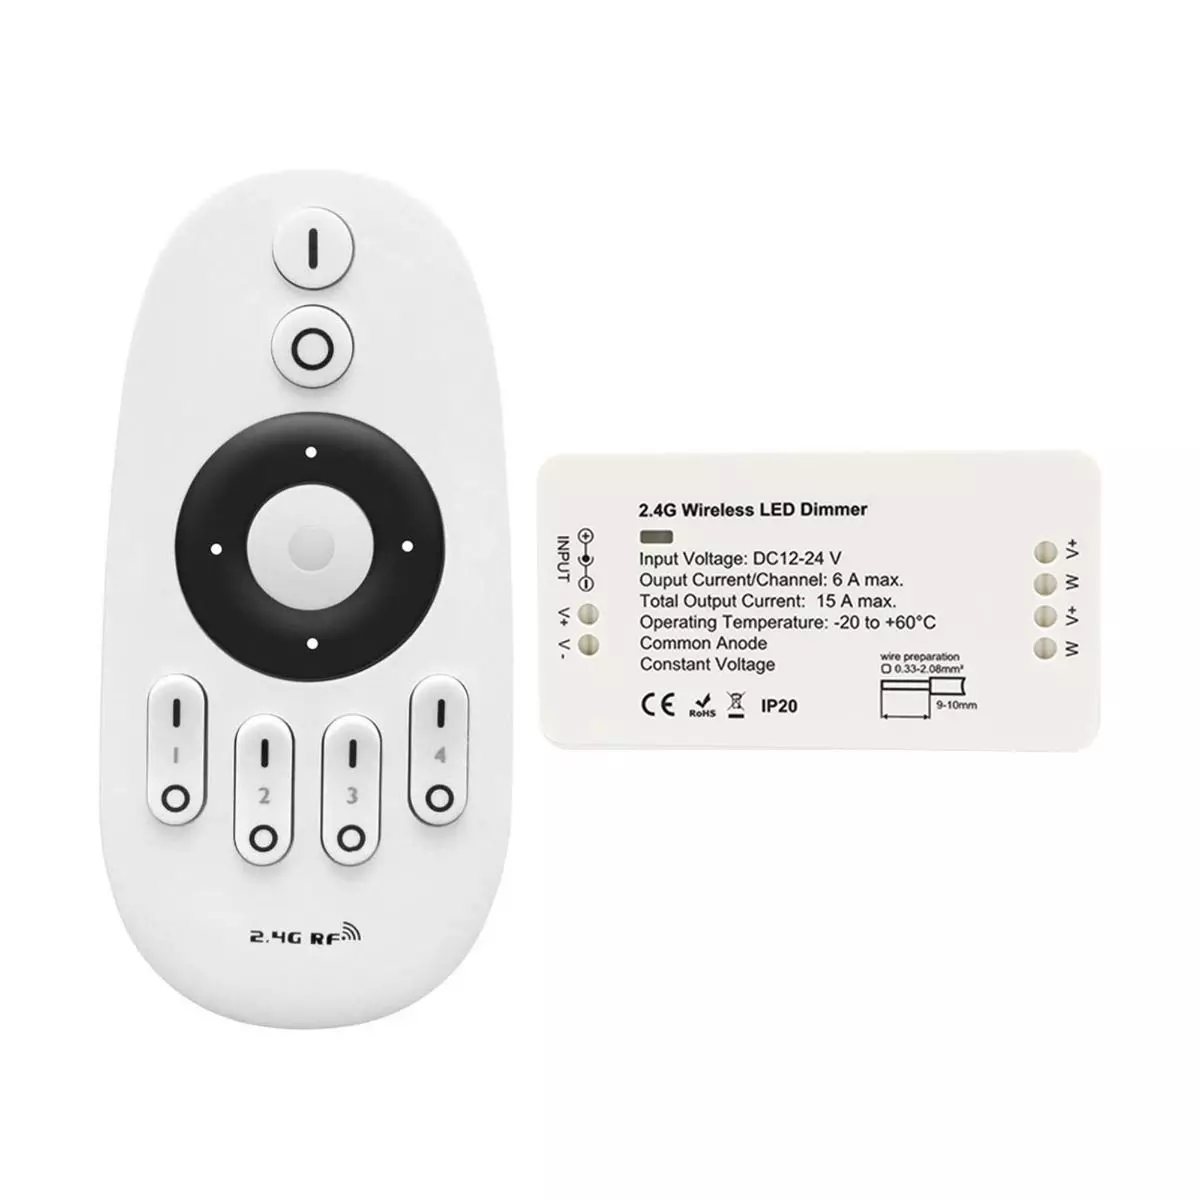 LED Dimmer Remote Control and Receiver Module - Battery Powered